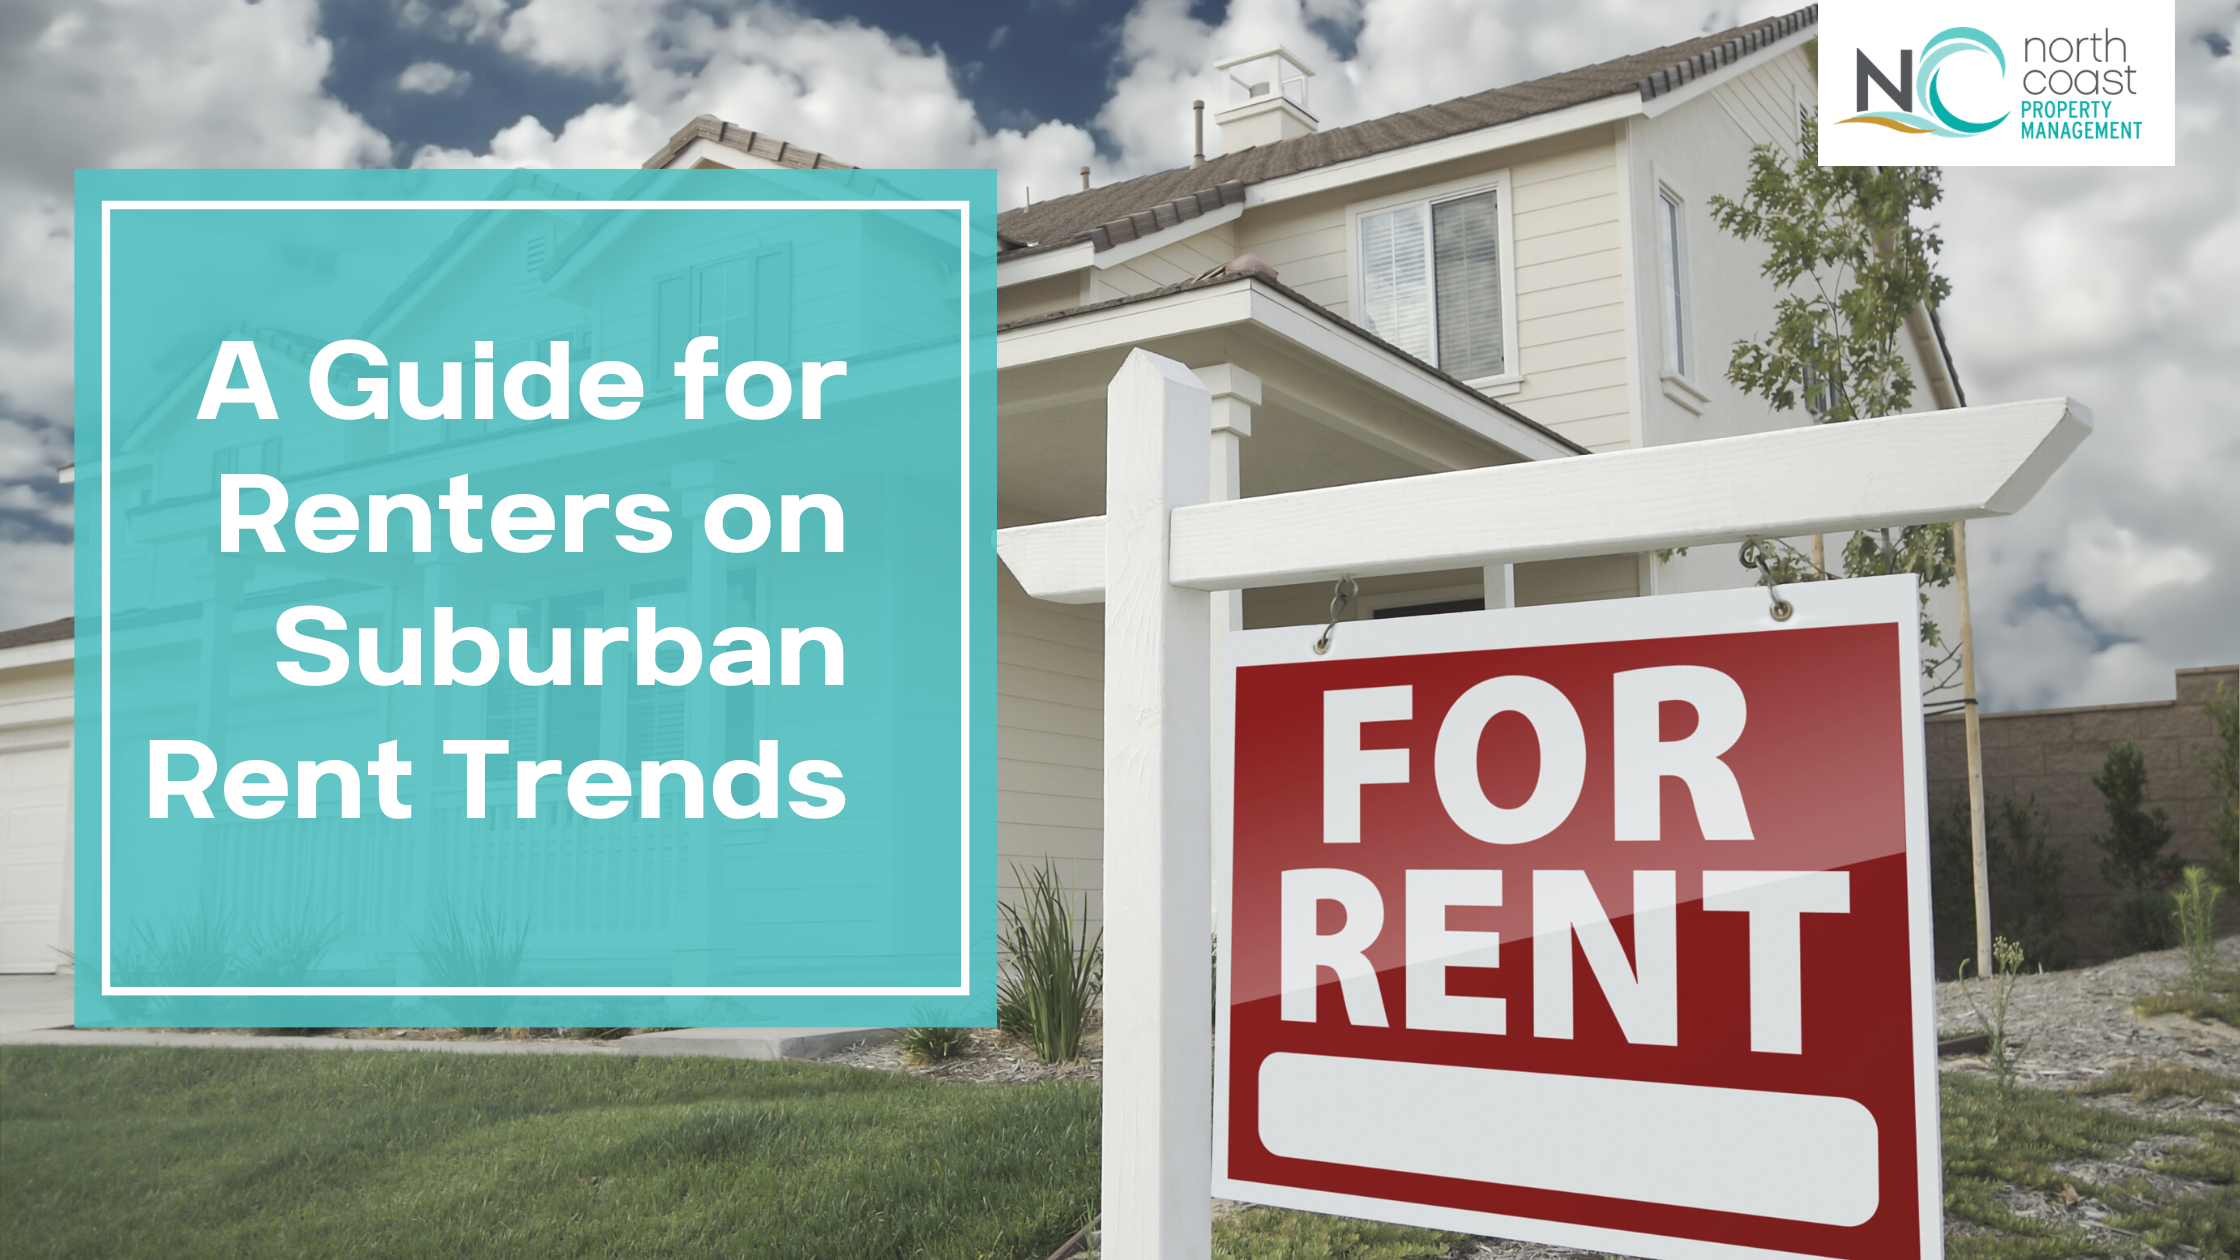 A Guide for Renters on Suburban Rent Trends